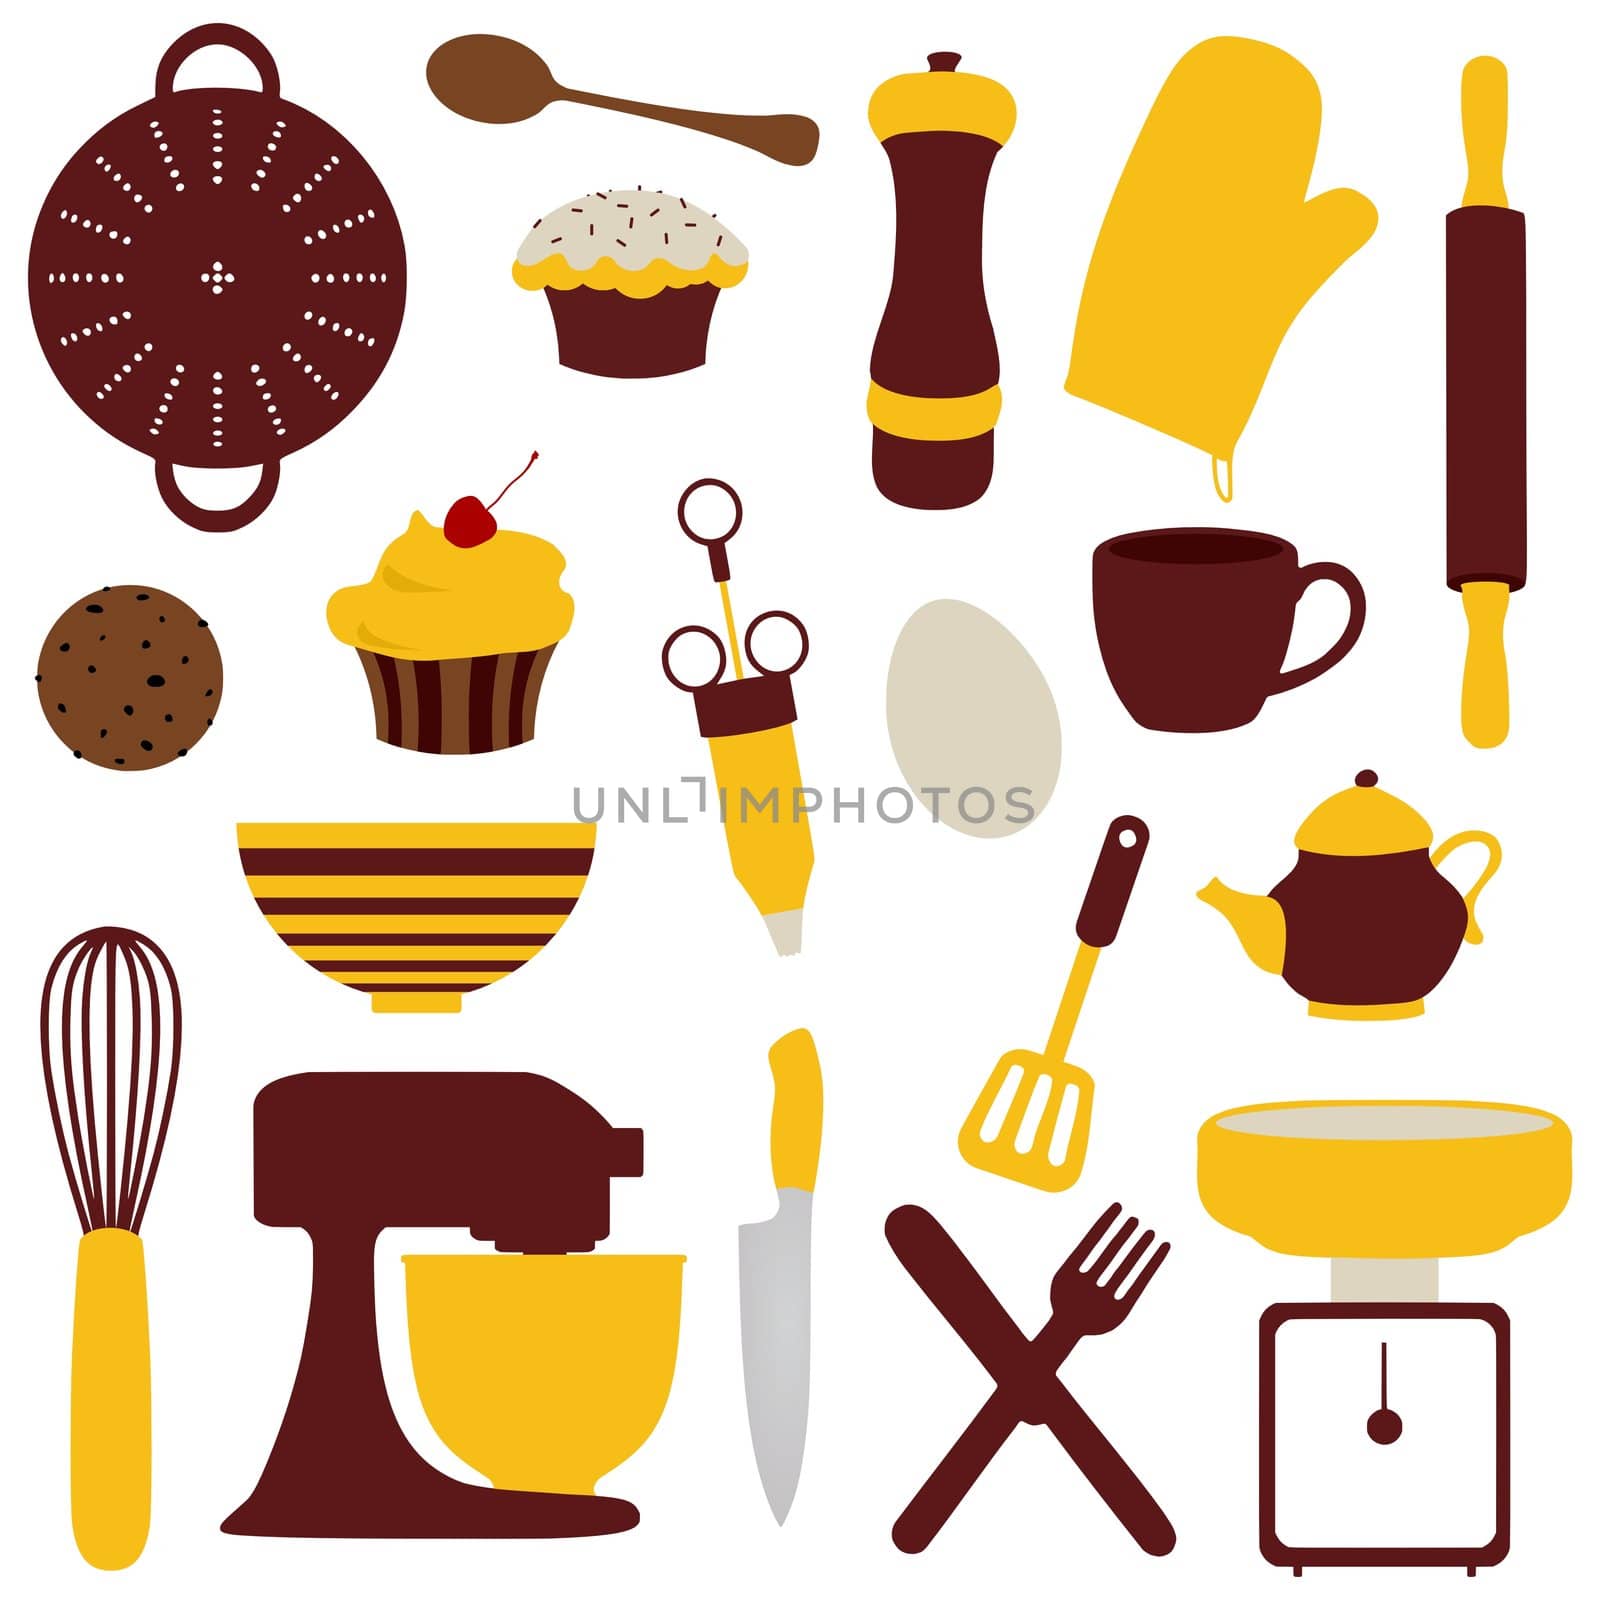 Illustration of many kitchen related items